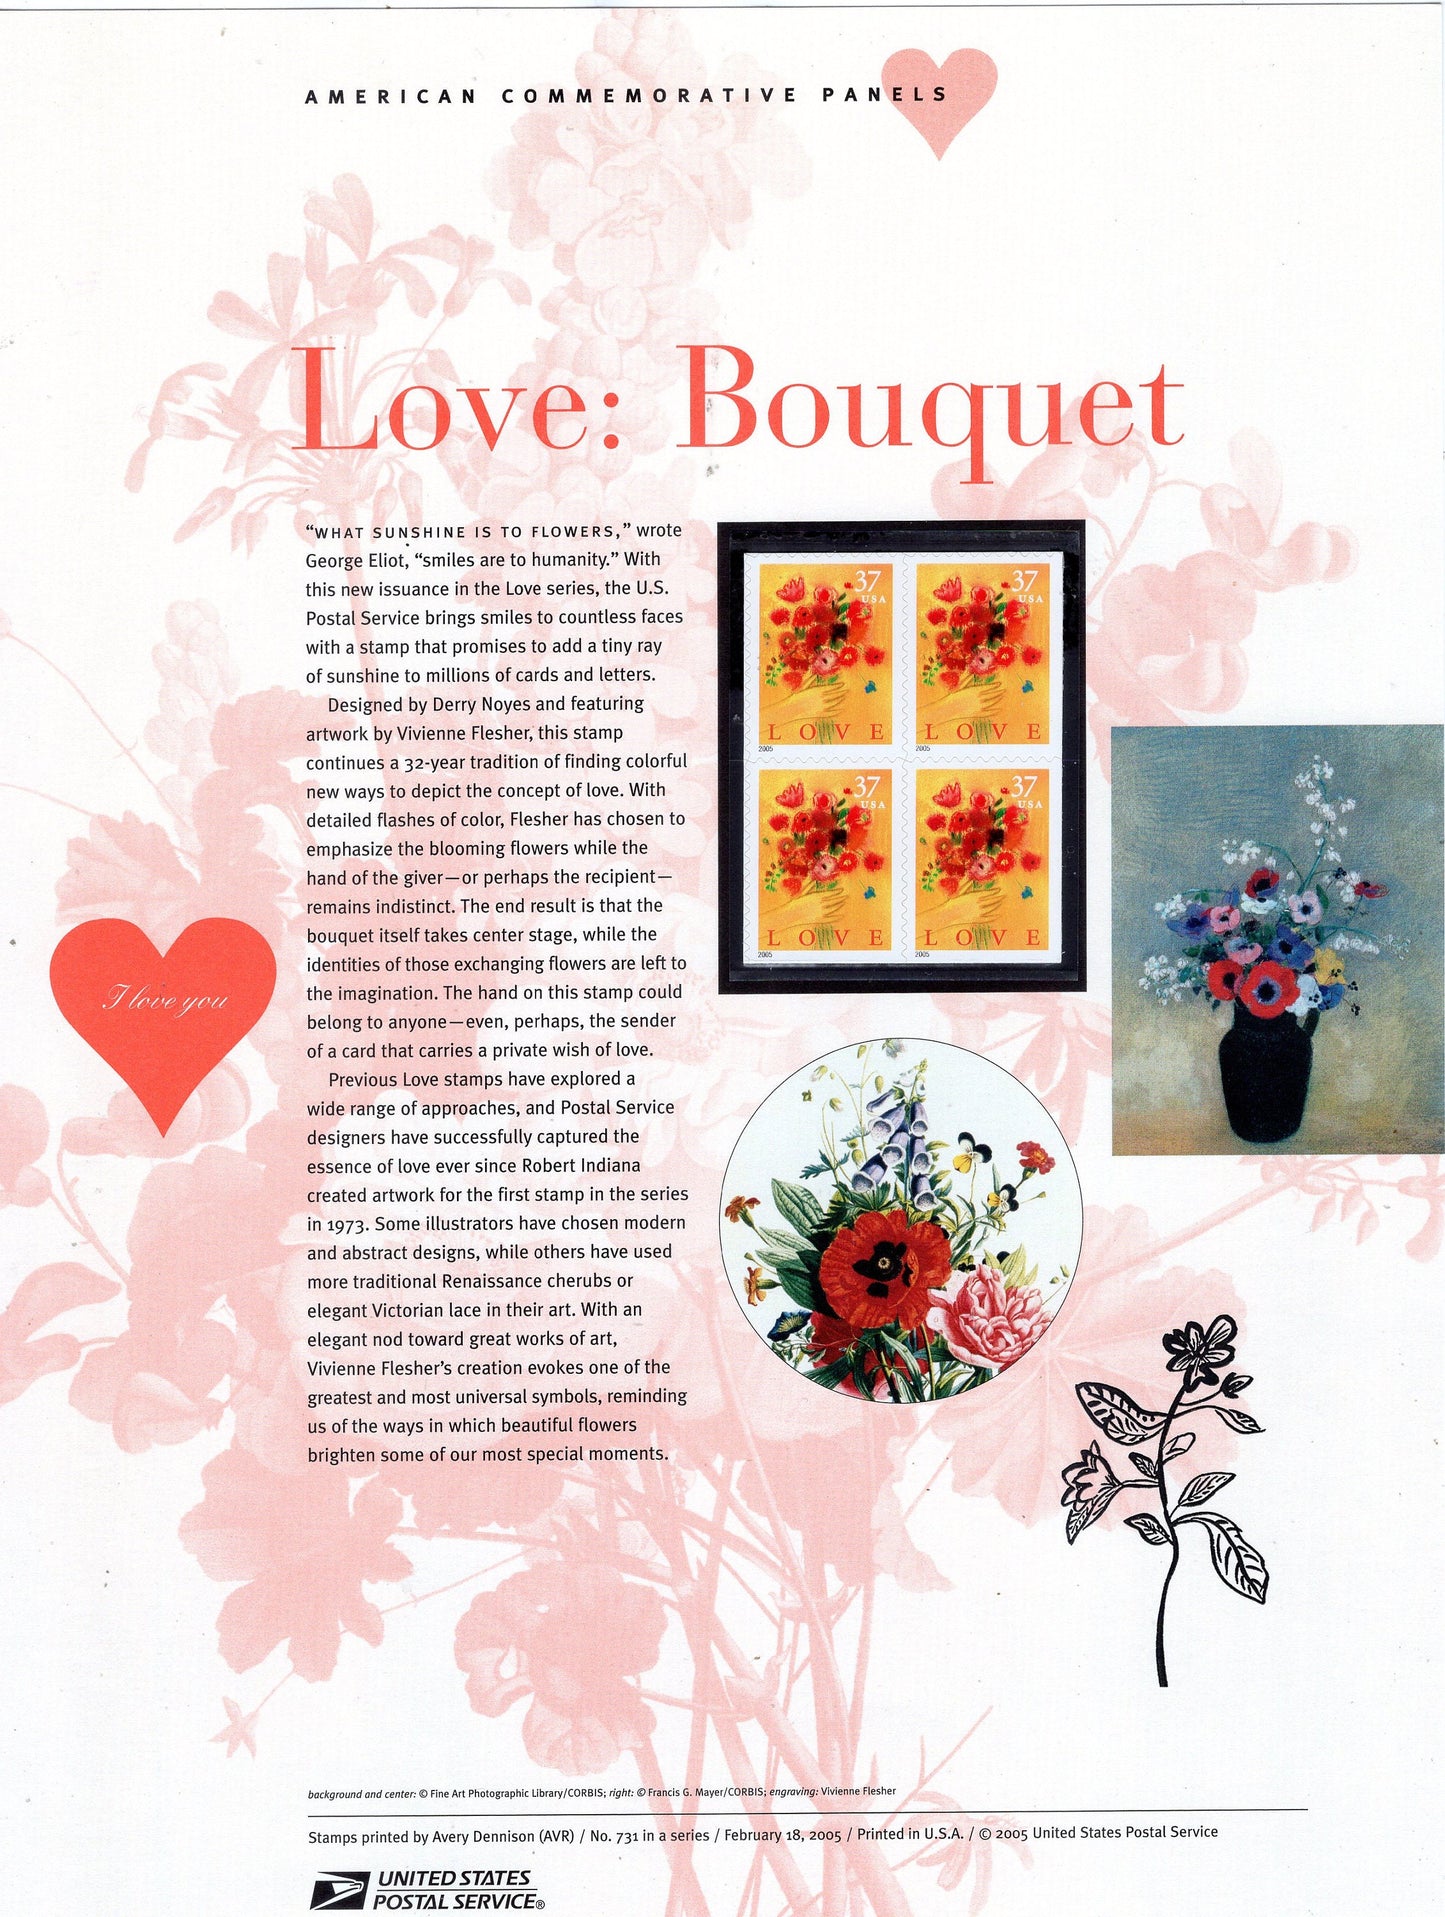 LOVE BOUQUET FLOWERS Special Commemorative Panel plus Actual Stamps + Illustrations and Text Great Gift 8.5x11 '05 -